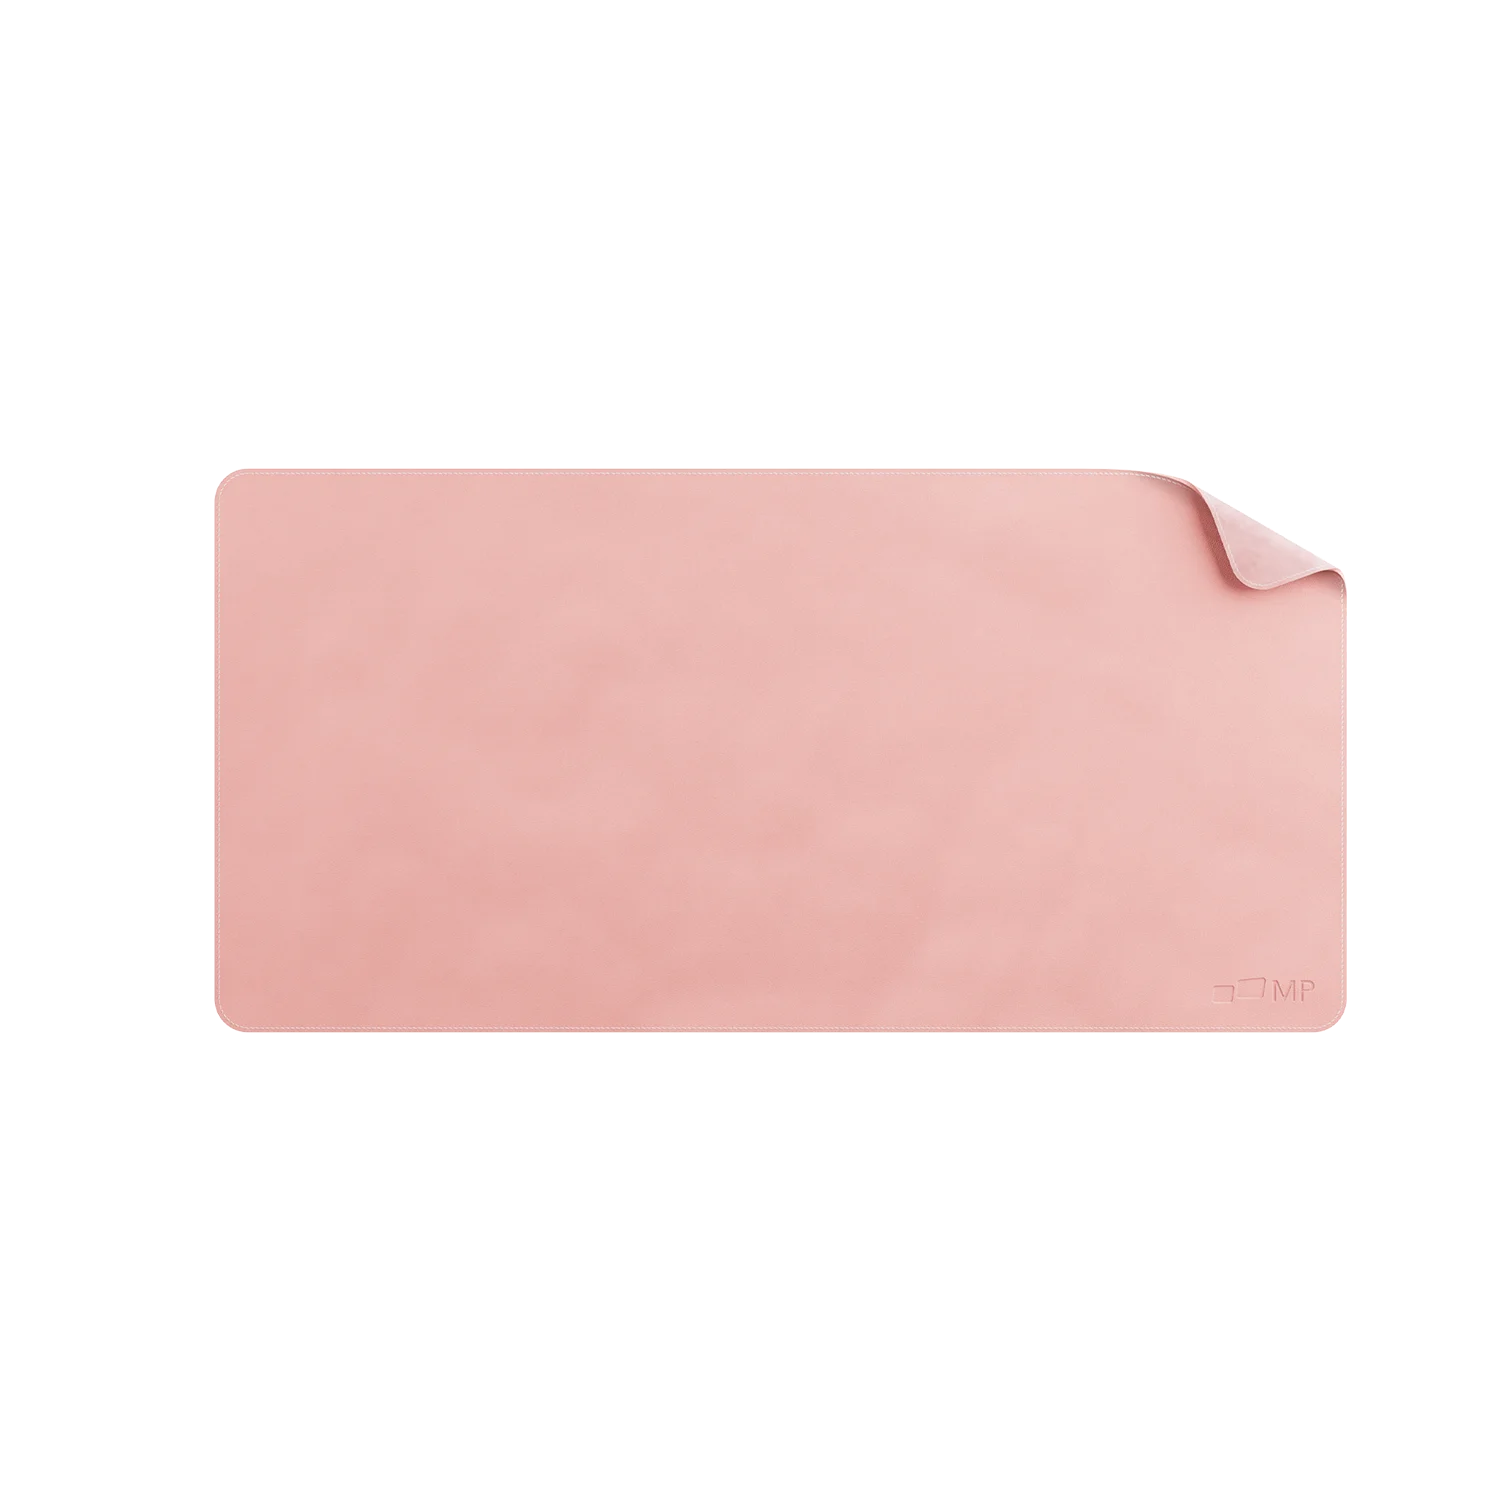 Leather Desk Mat Pink Solid Color Mousepad Non-Slip Waterproof